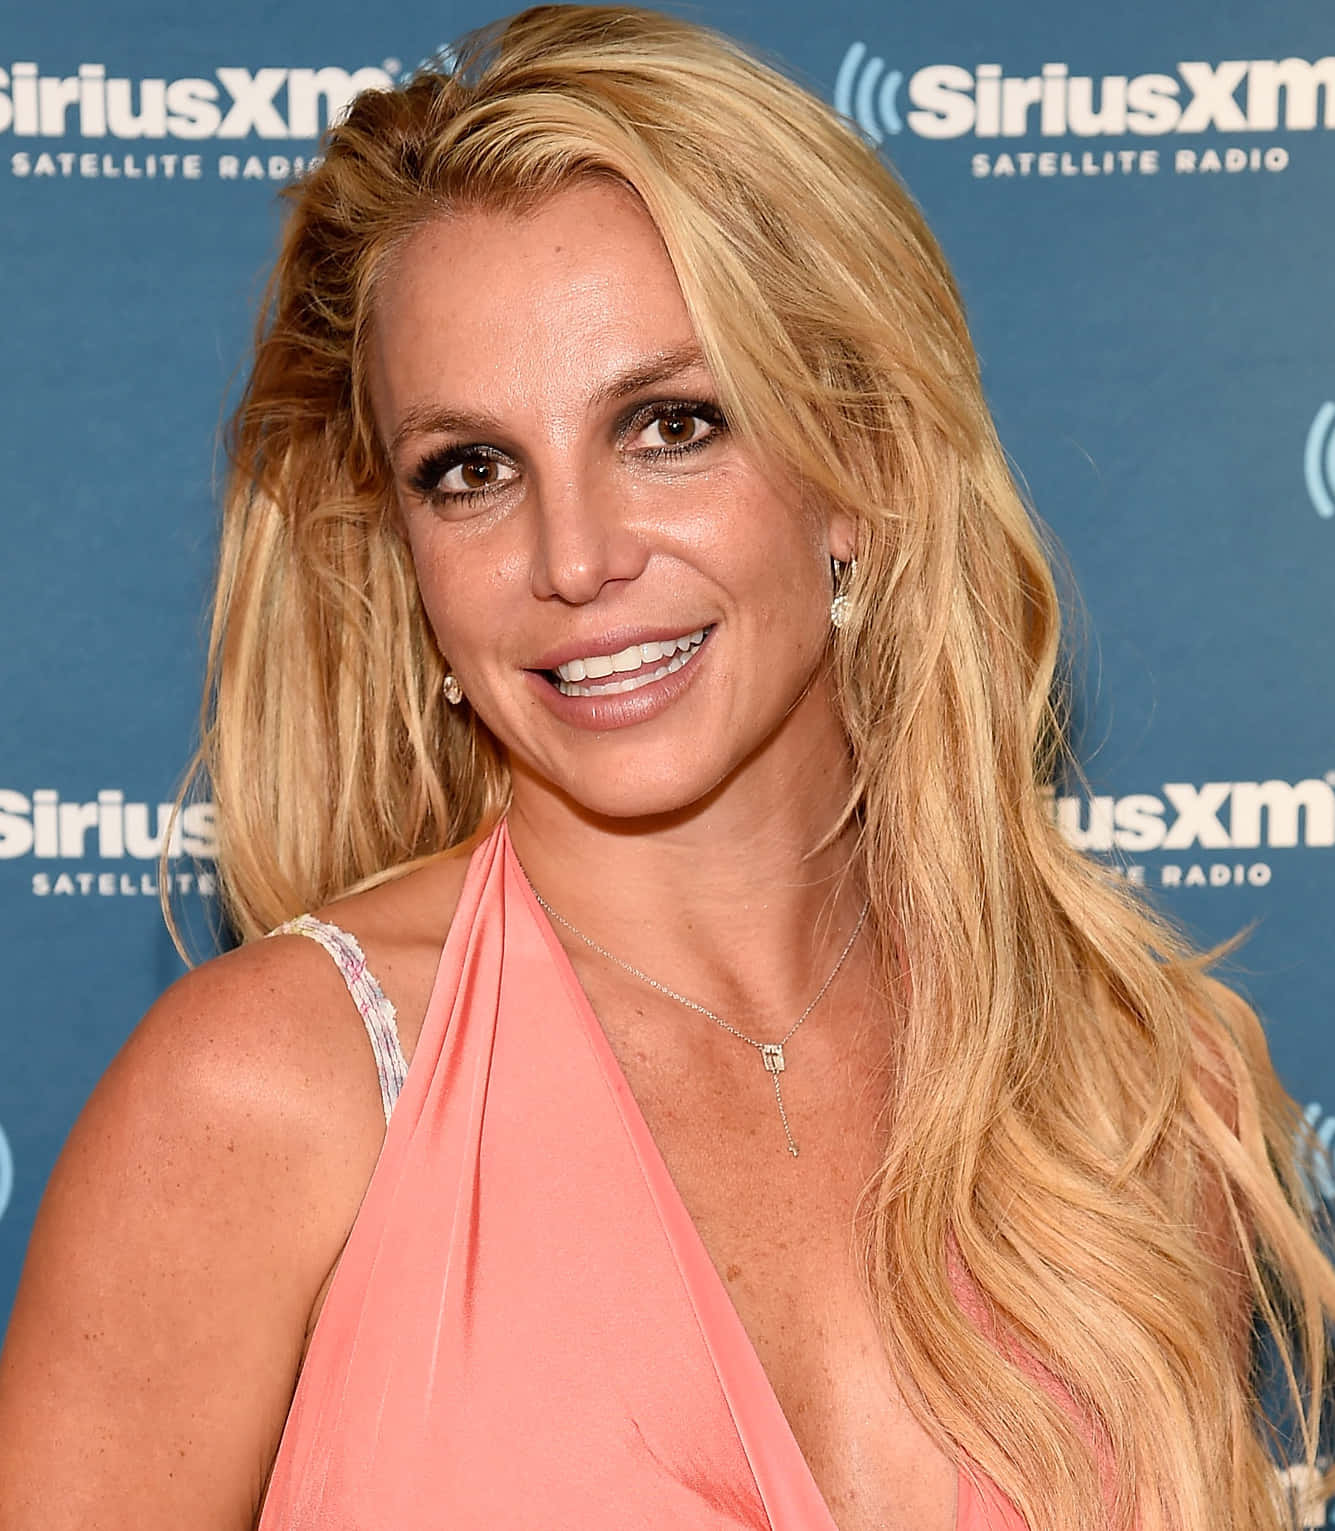 L'affascinanteed Iconica Britney Spears